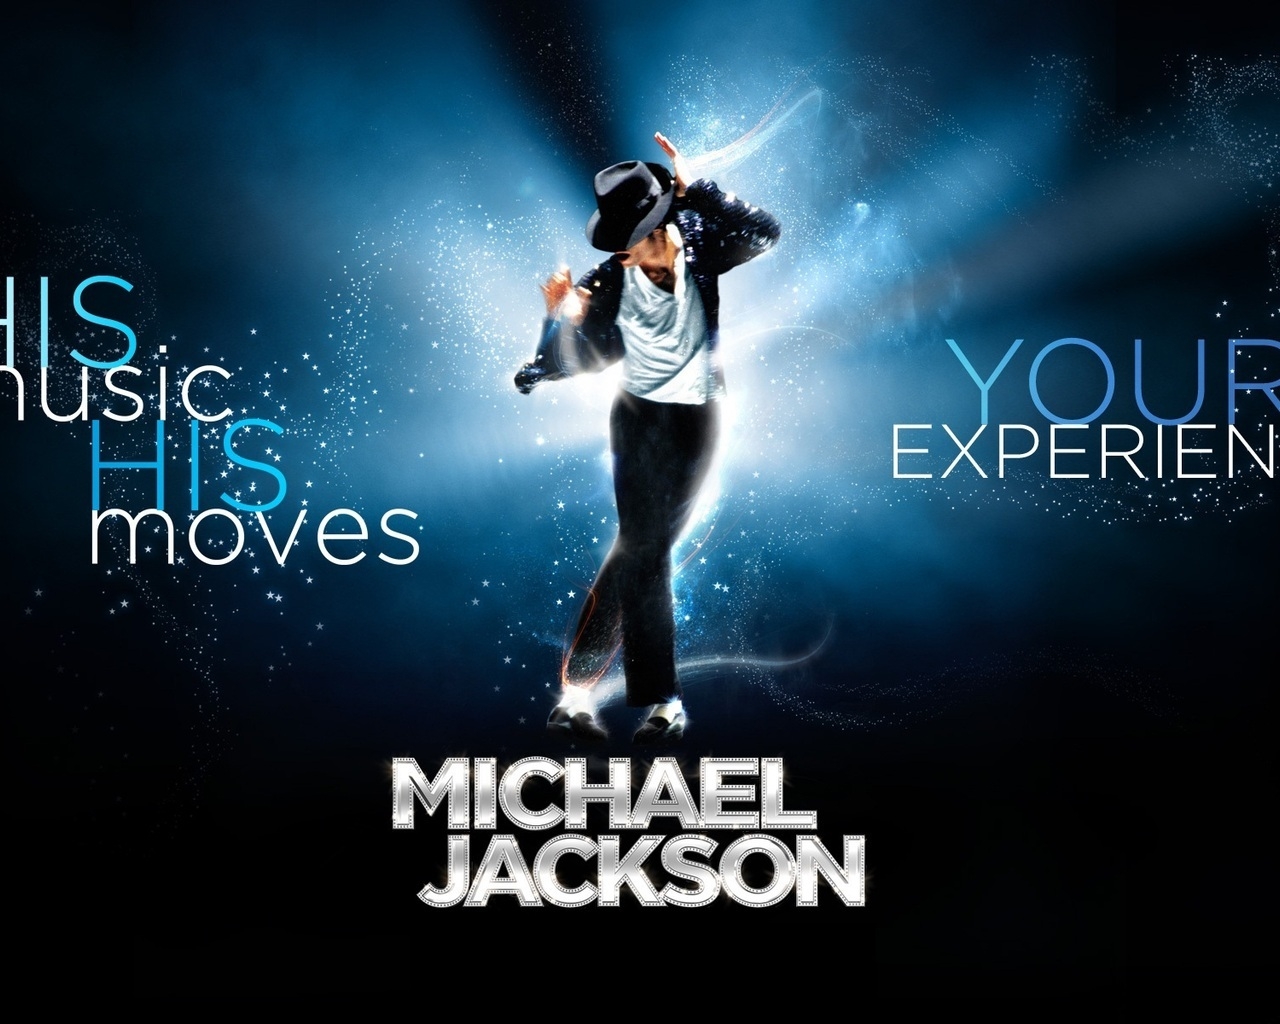 Michael Jackson Experience for 1280 x 1024 resolution